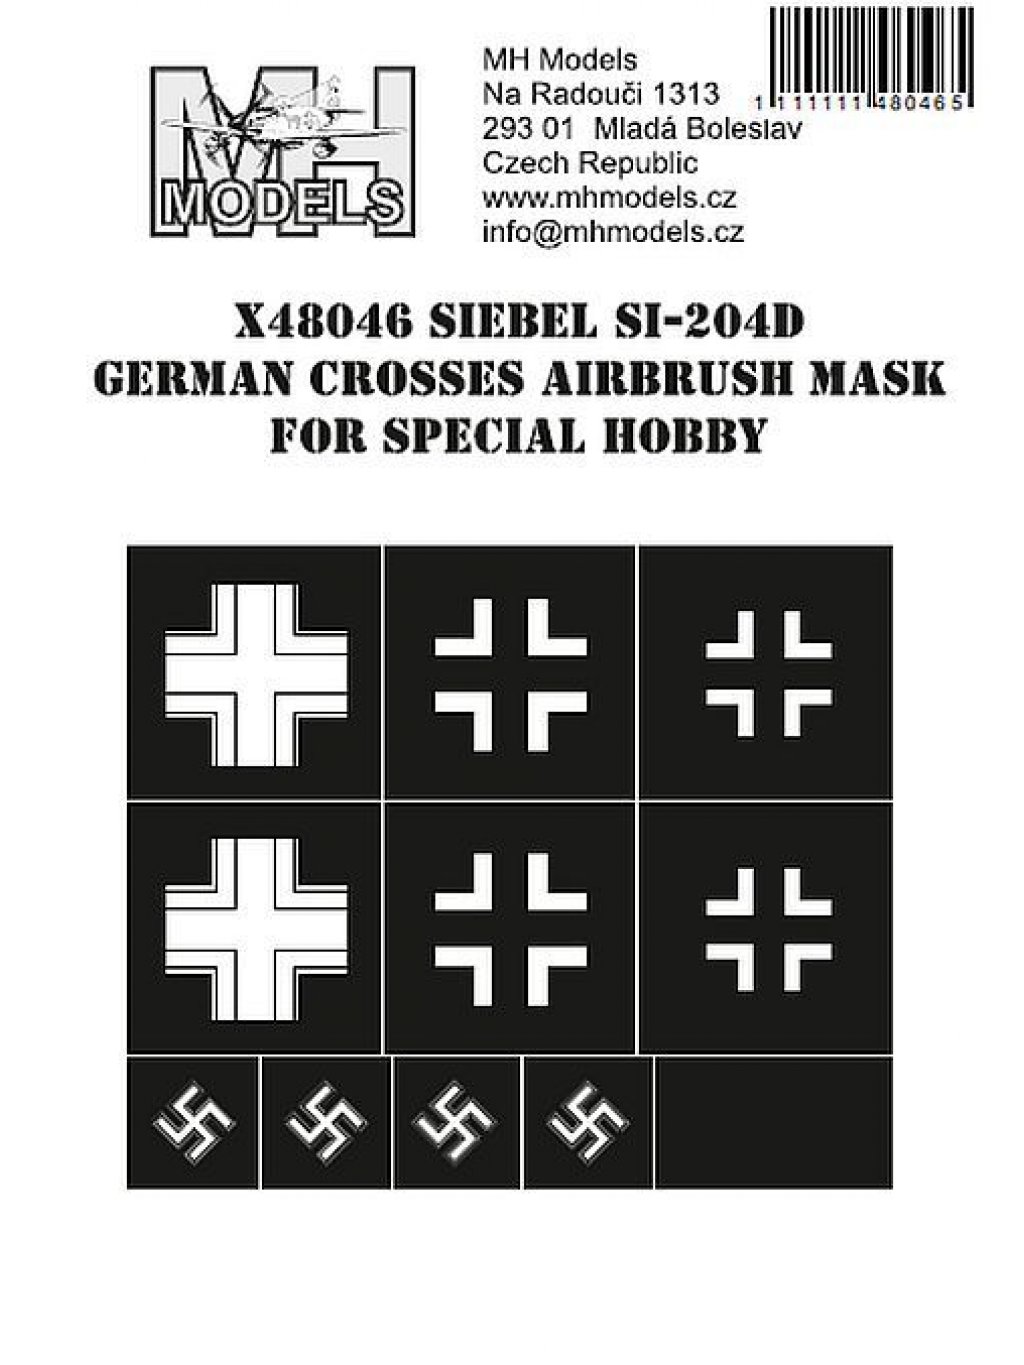 Siebel Si-204D German crosses airbrush mask for Special Hobby